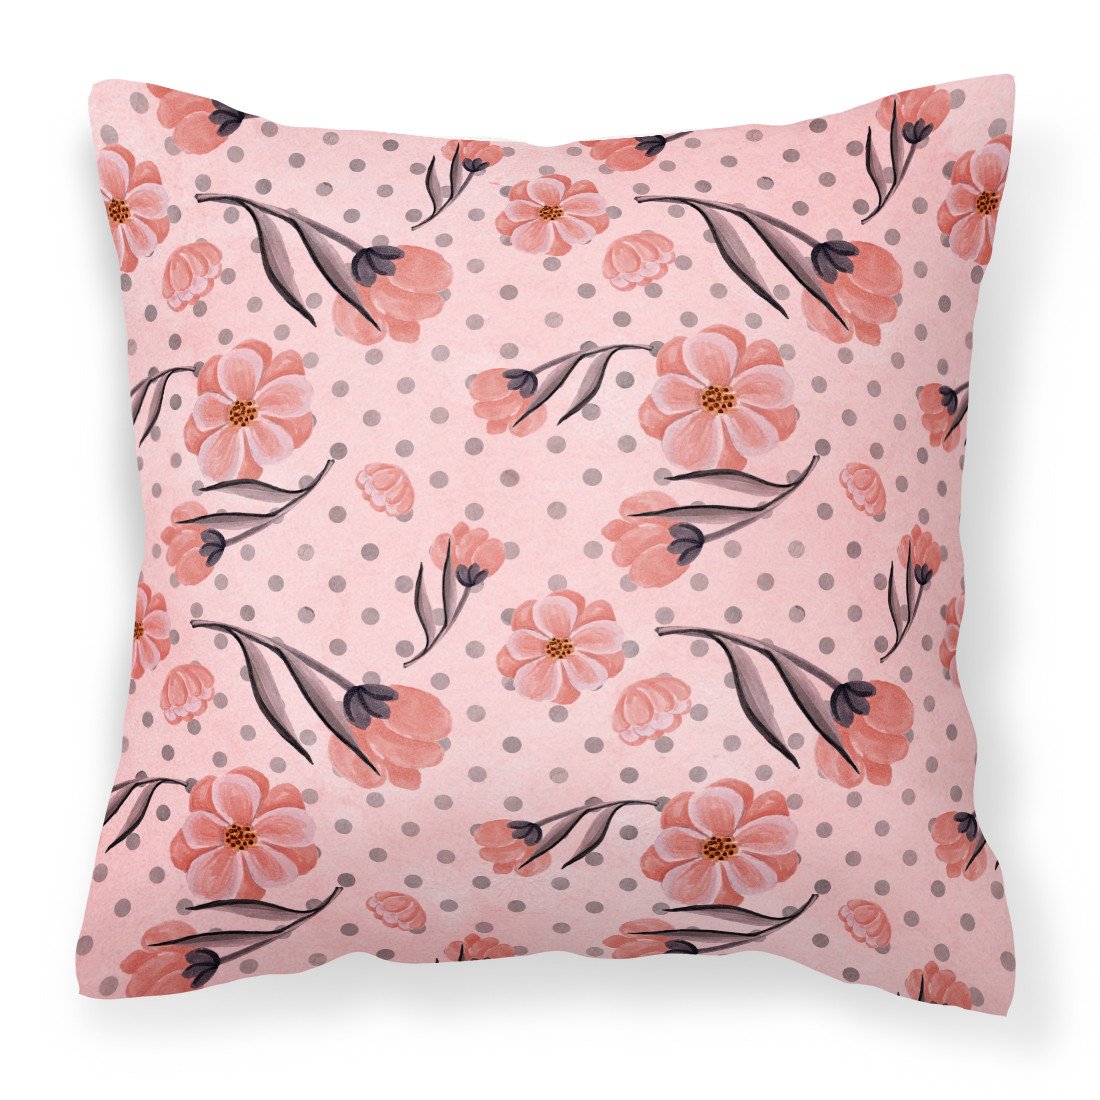 Pink Flowers and Polka Dots Fabric Decorative Pillow BB7499PW1818 by Caroline's Treasures